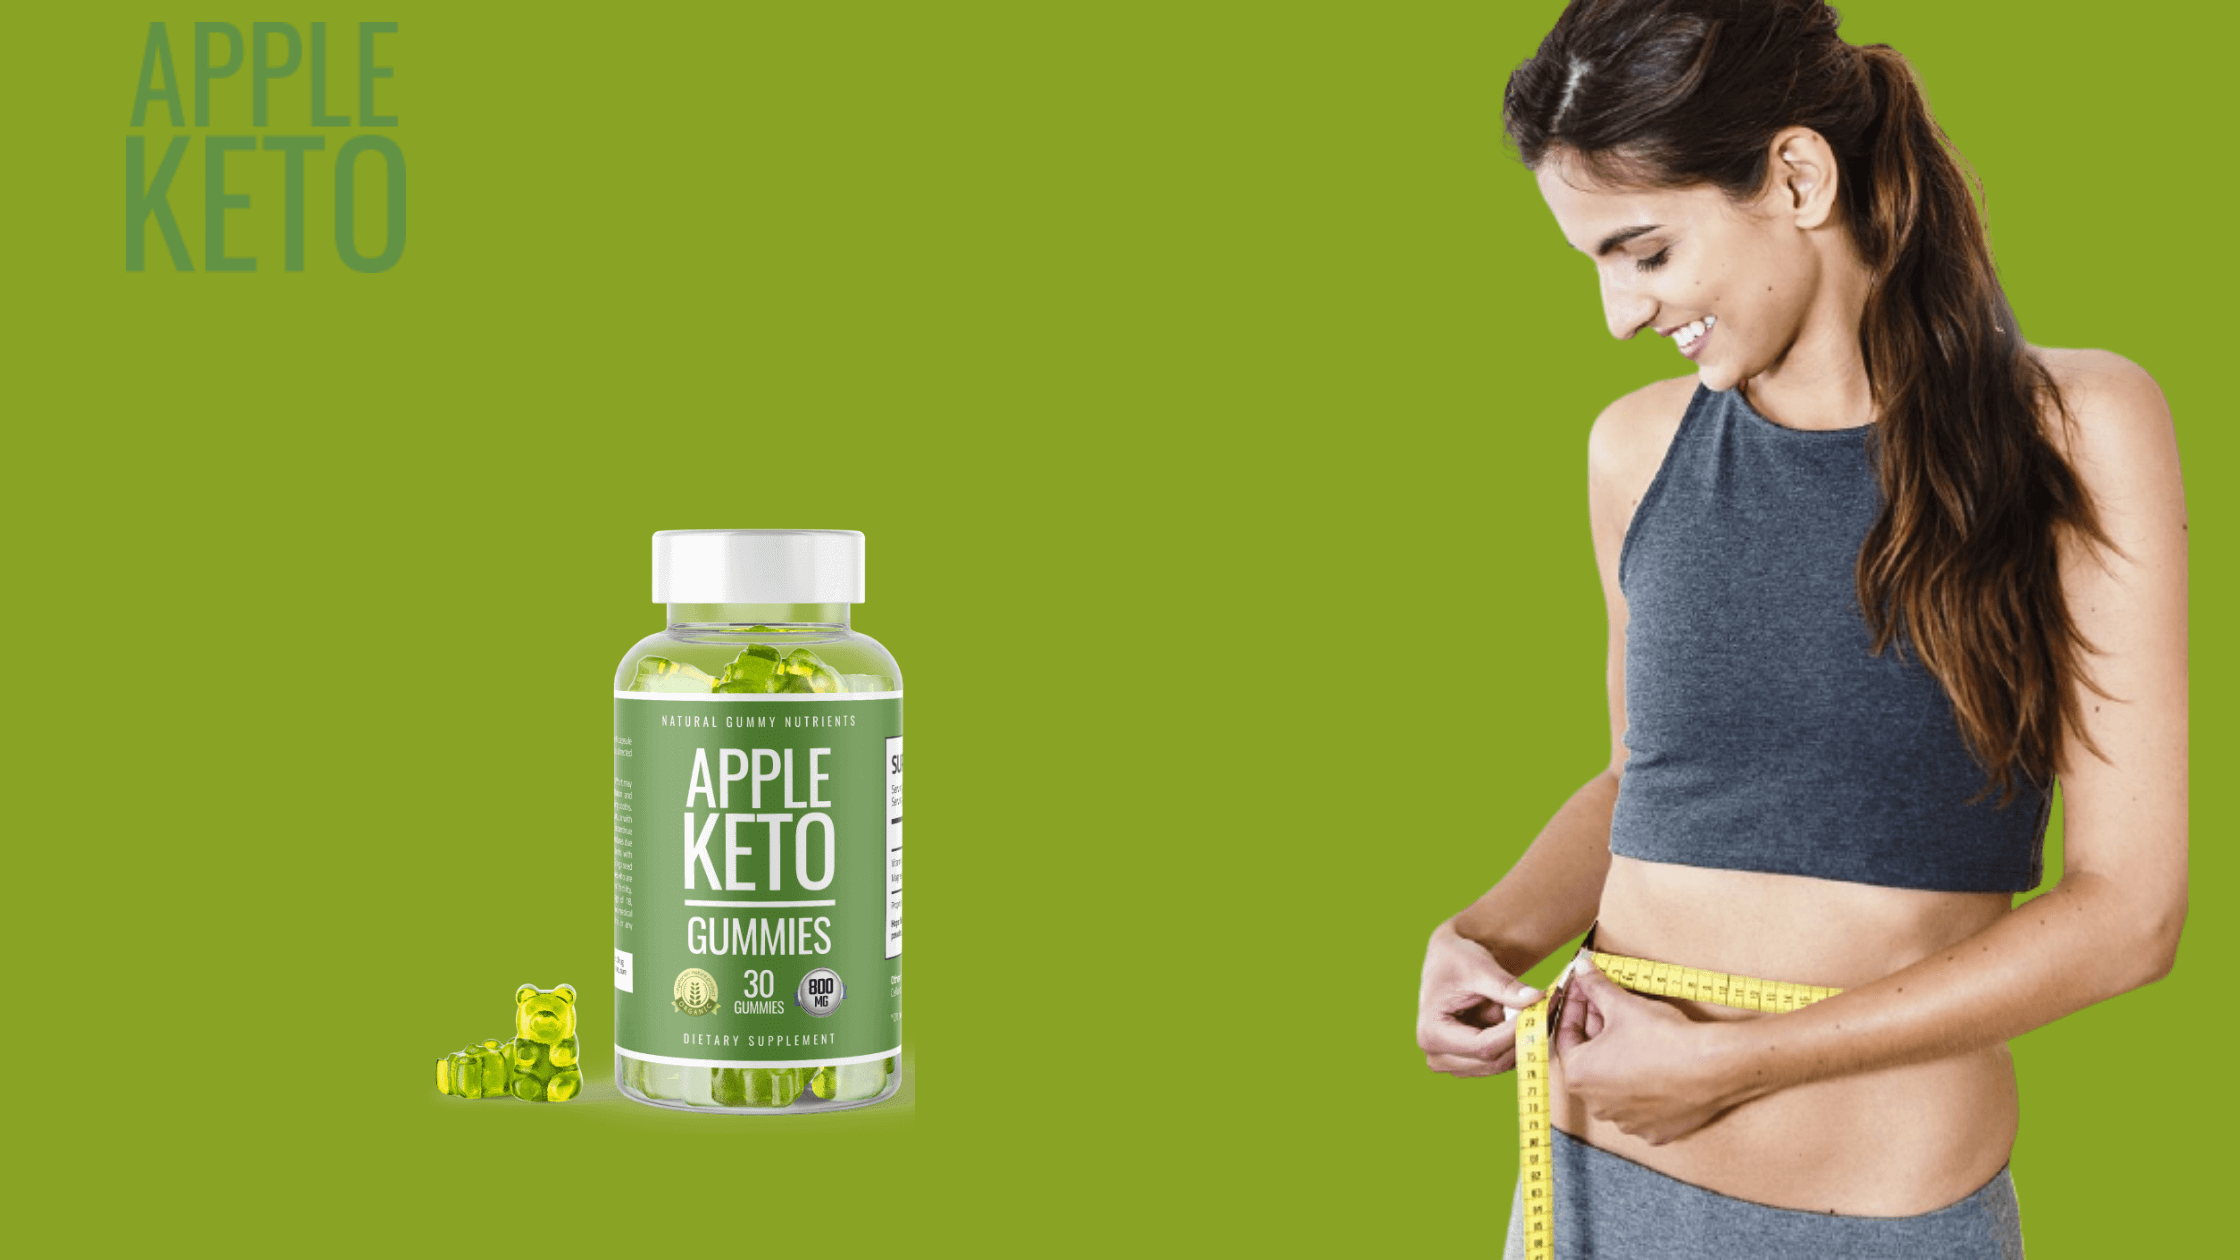 Apple Keto Gummies - Weight Loss Results, Ingredients, Scam, Shark Tank?